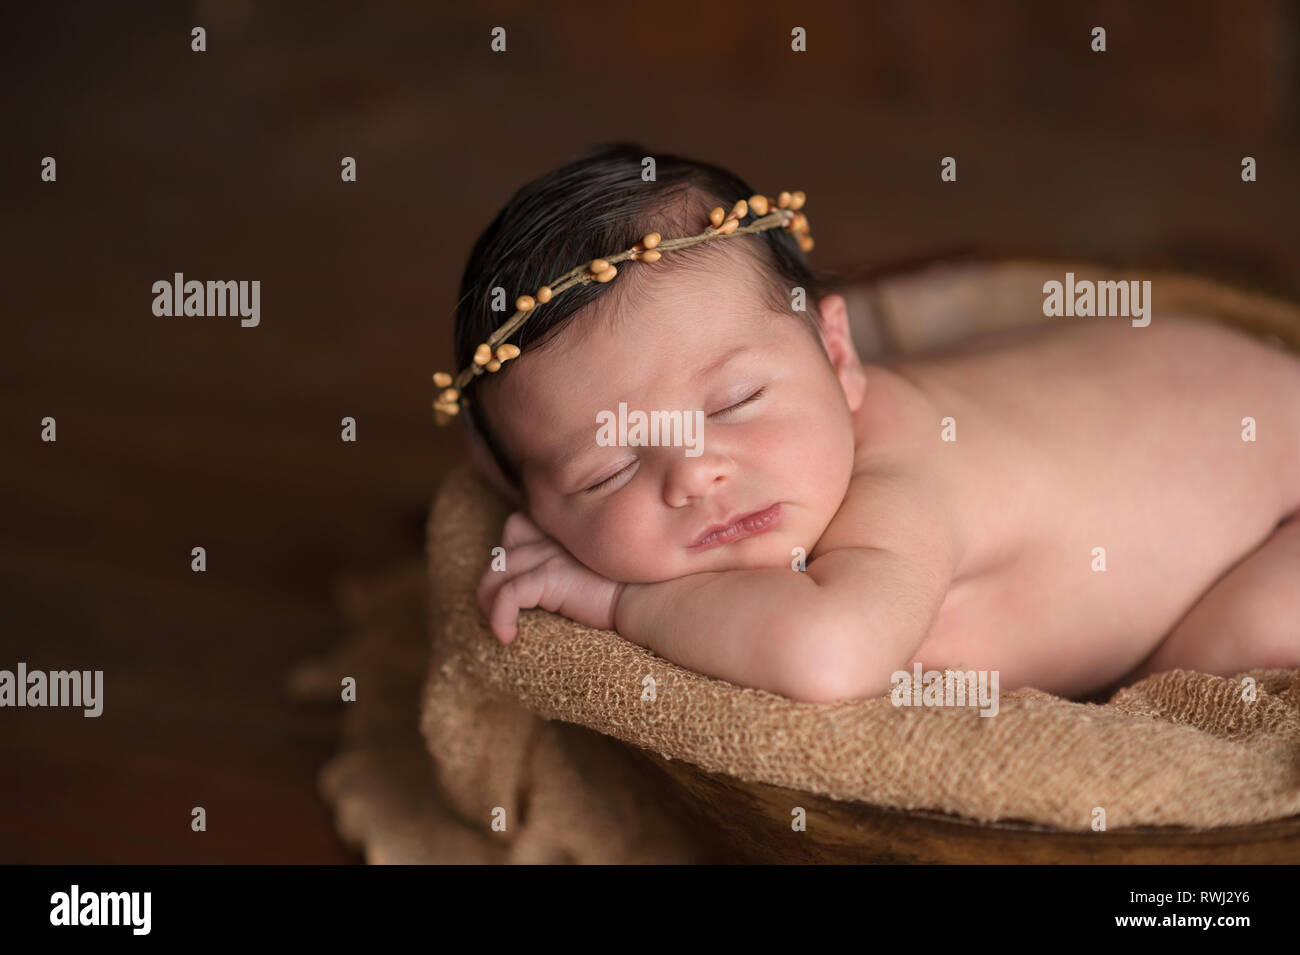 Portrait of a week old sleeping newborn baby girl. She is wearing a natural twig crown and sleeping inside of a little bowl. Stock Photo